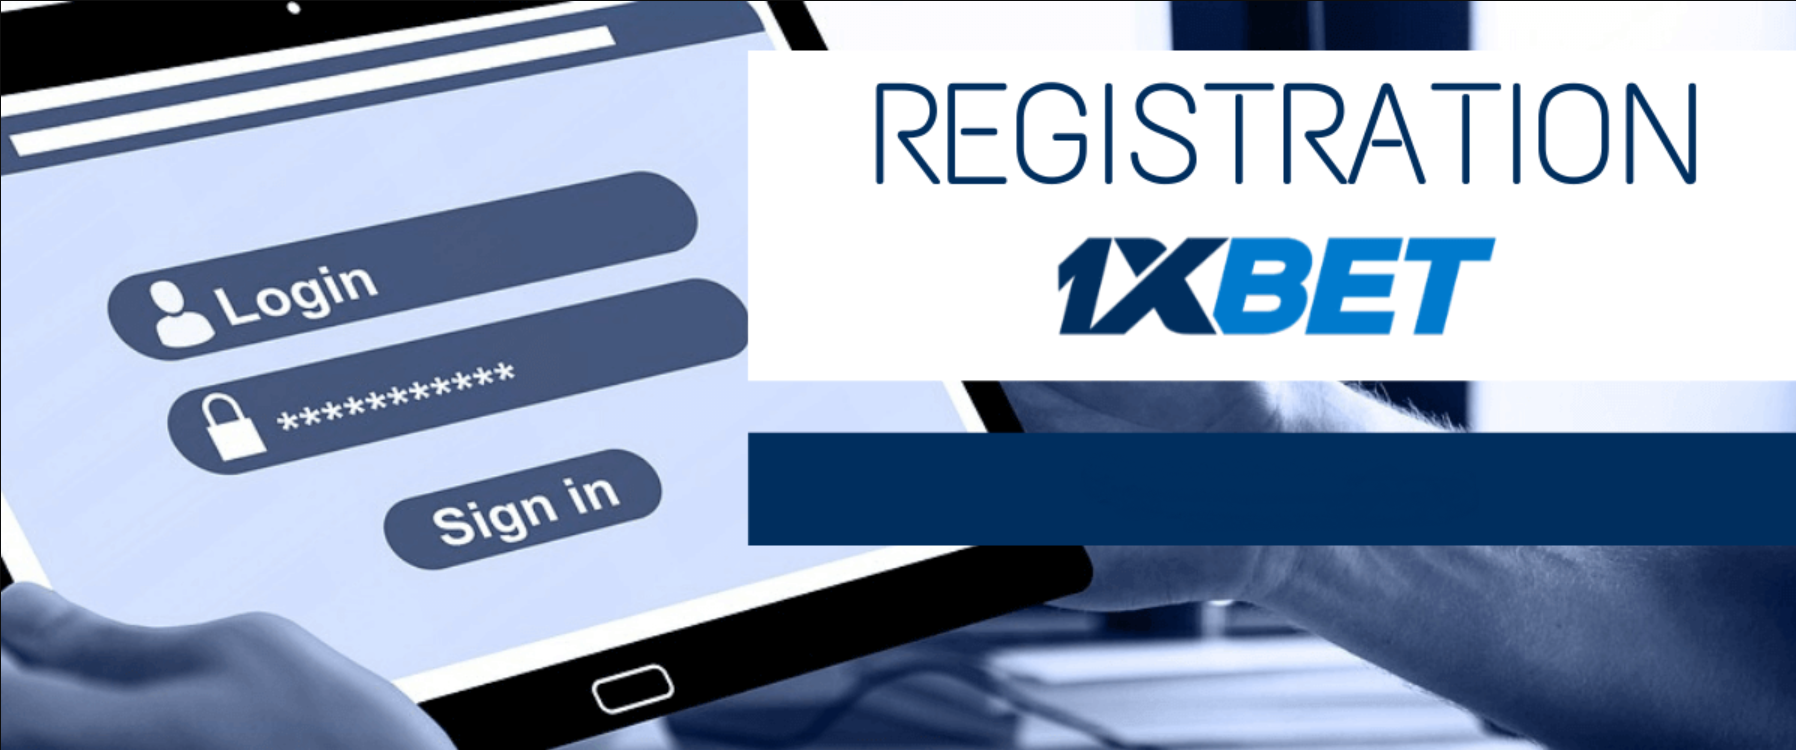 Why should you sign up to the 1xBet platform?